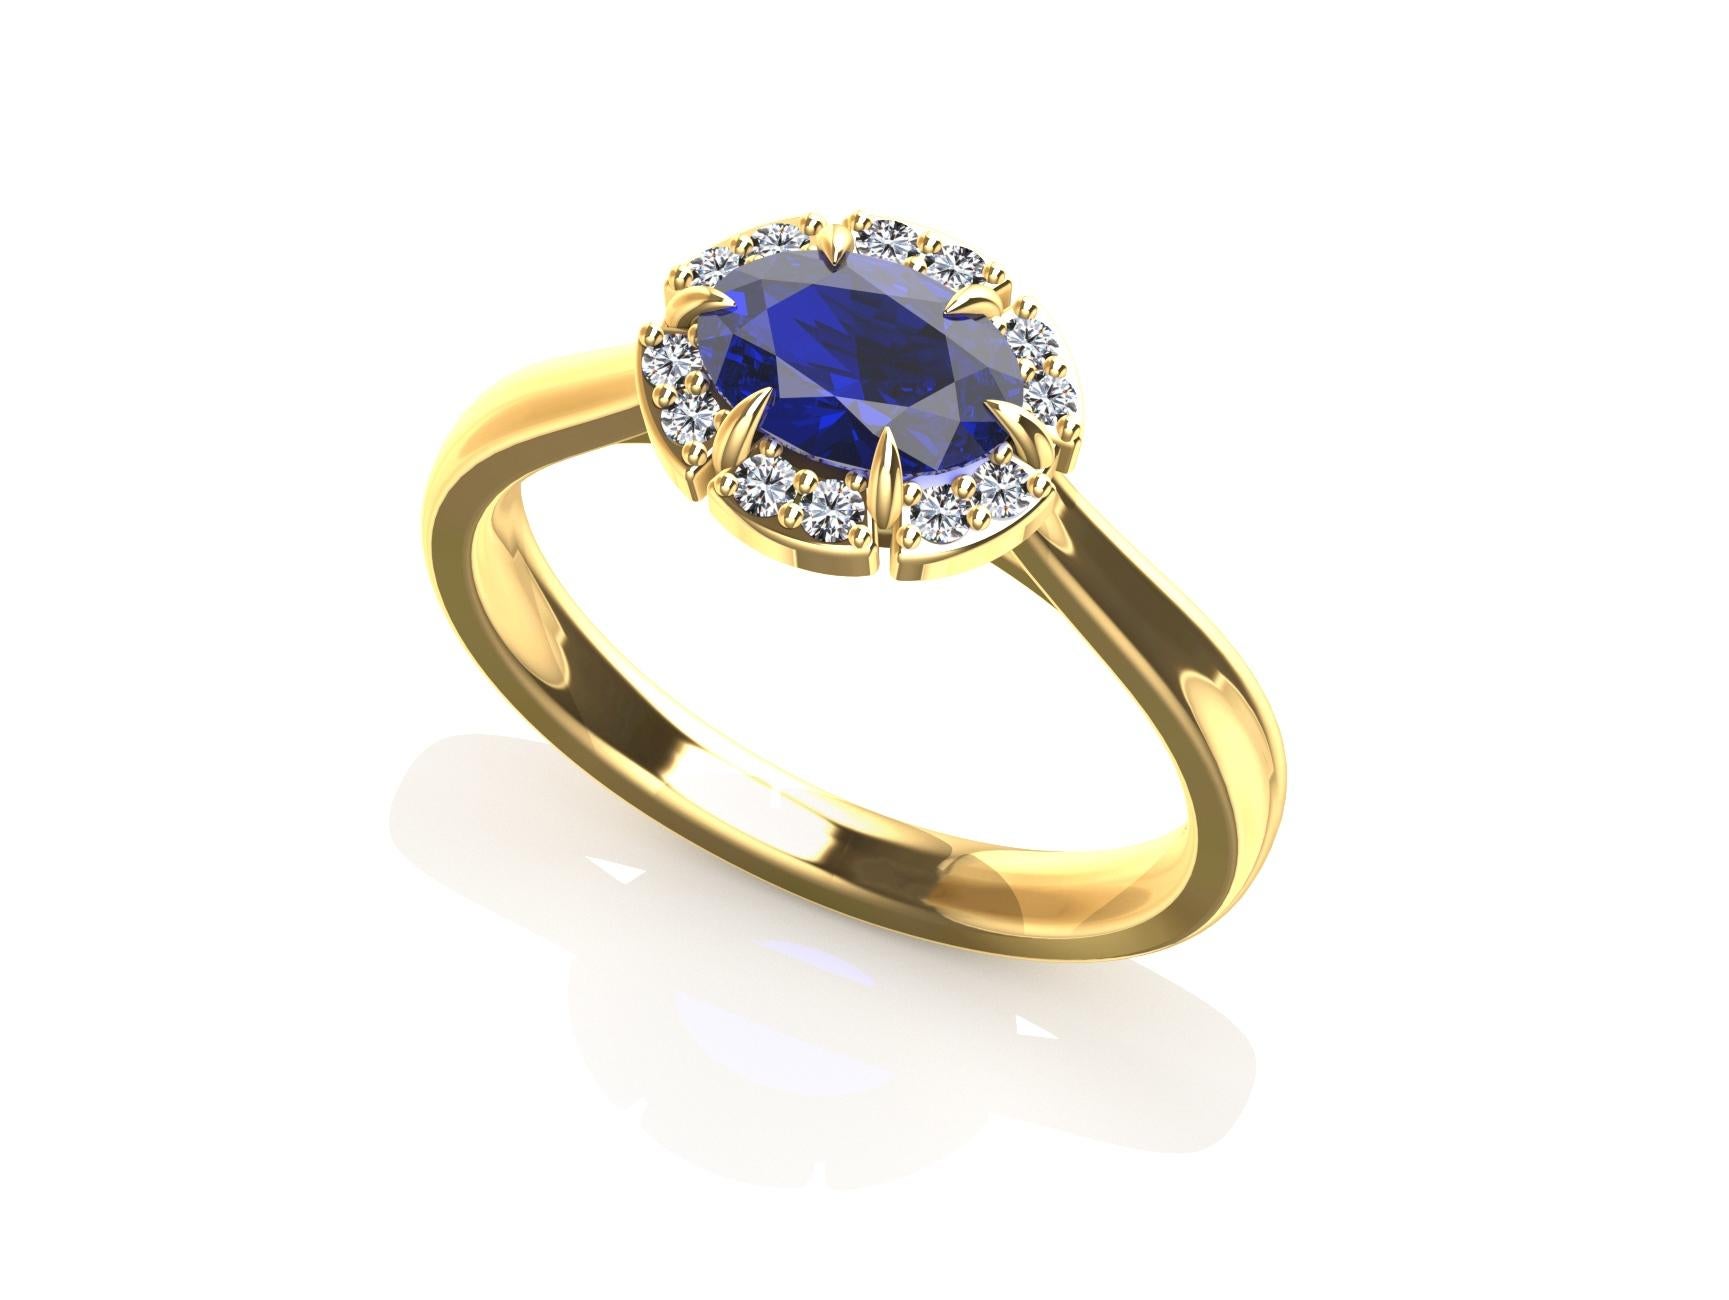 For Sale:  18 Karat Yellow Gold Art Deco Blue Sapphire Inspired Engagement Ring 2